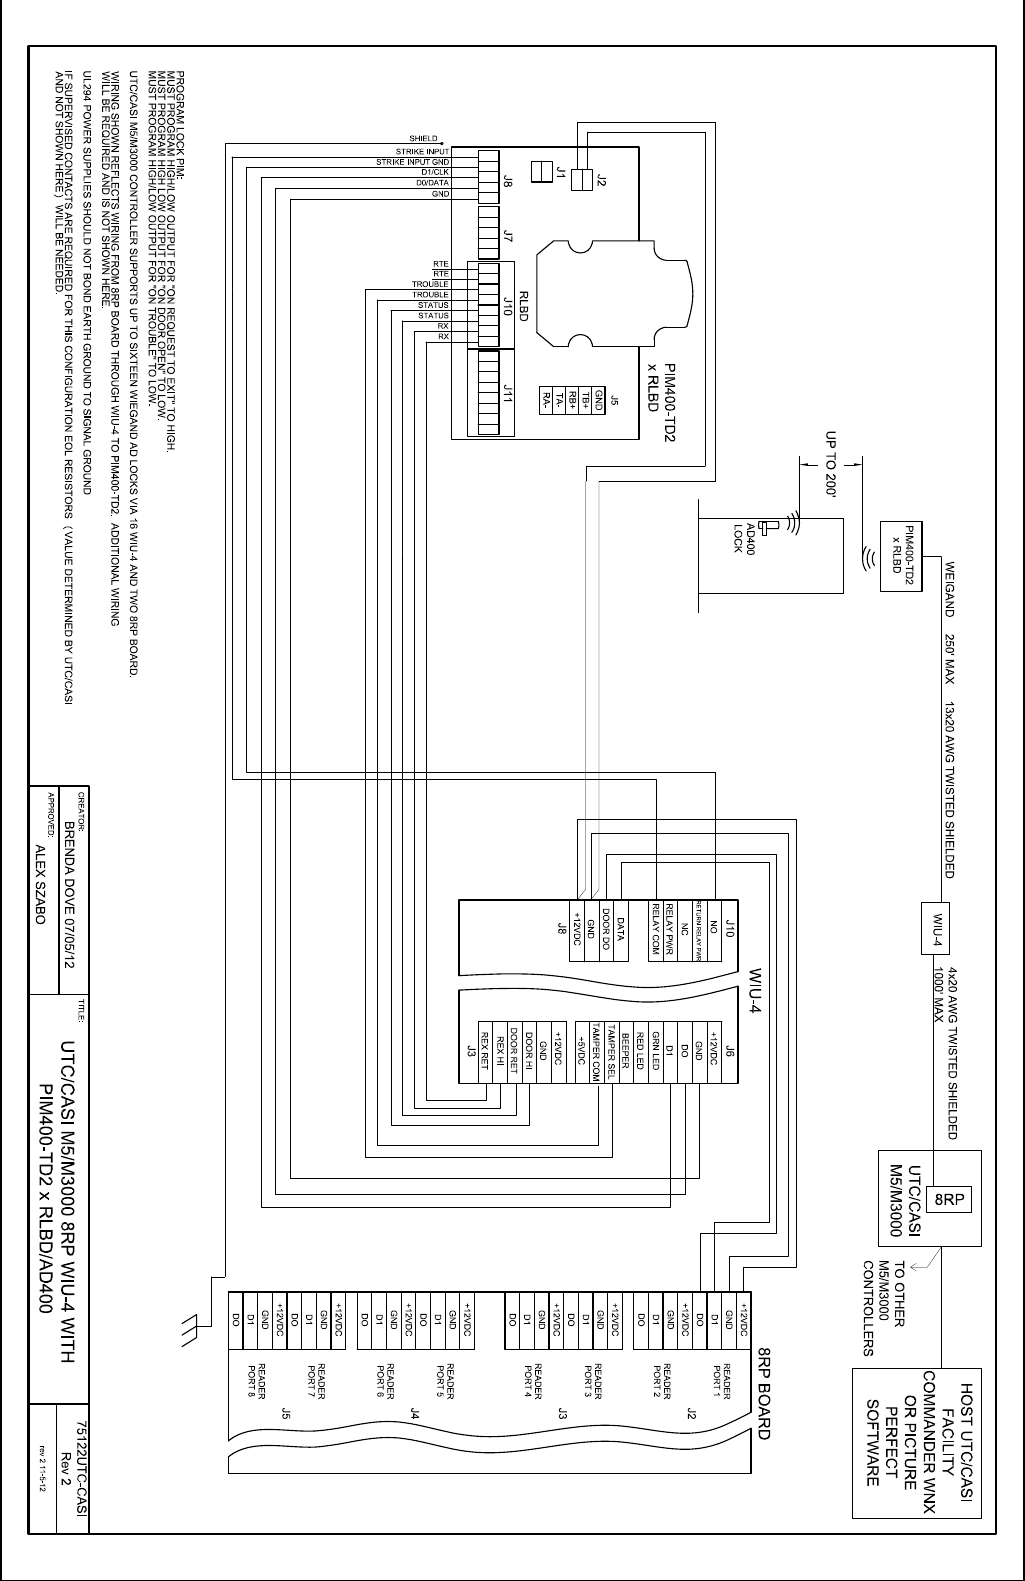 Page 1 of 1 - Schlage Electronics C AD400 Wiring Diagram UTC-Casi M5 M3000 8RP WIU-4 Wiegand 109171